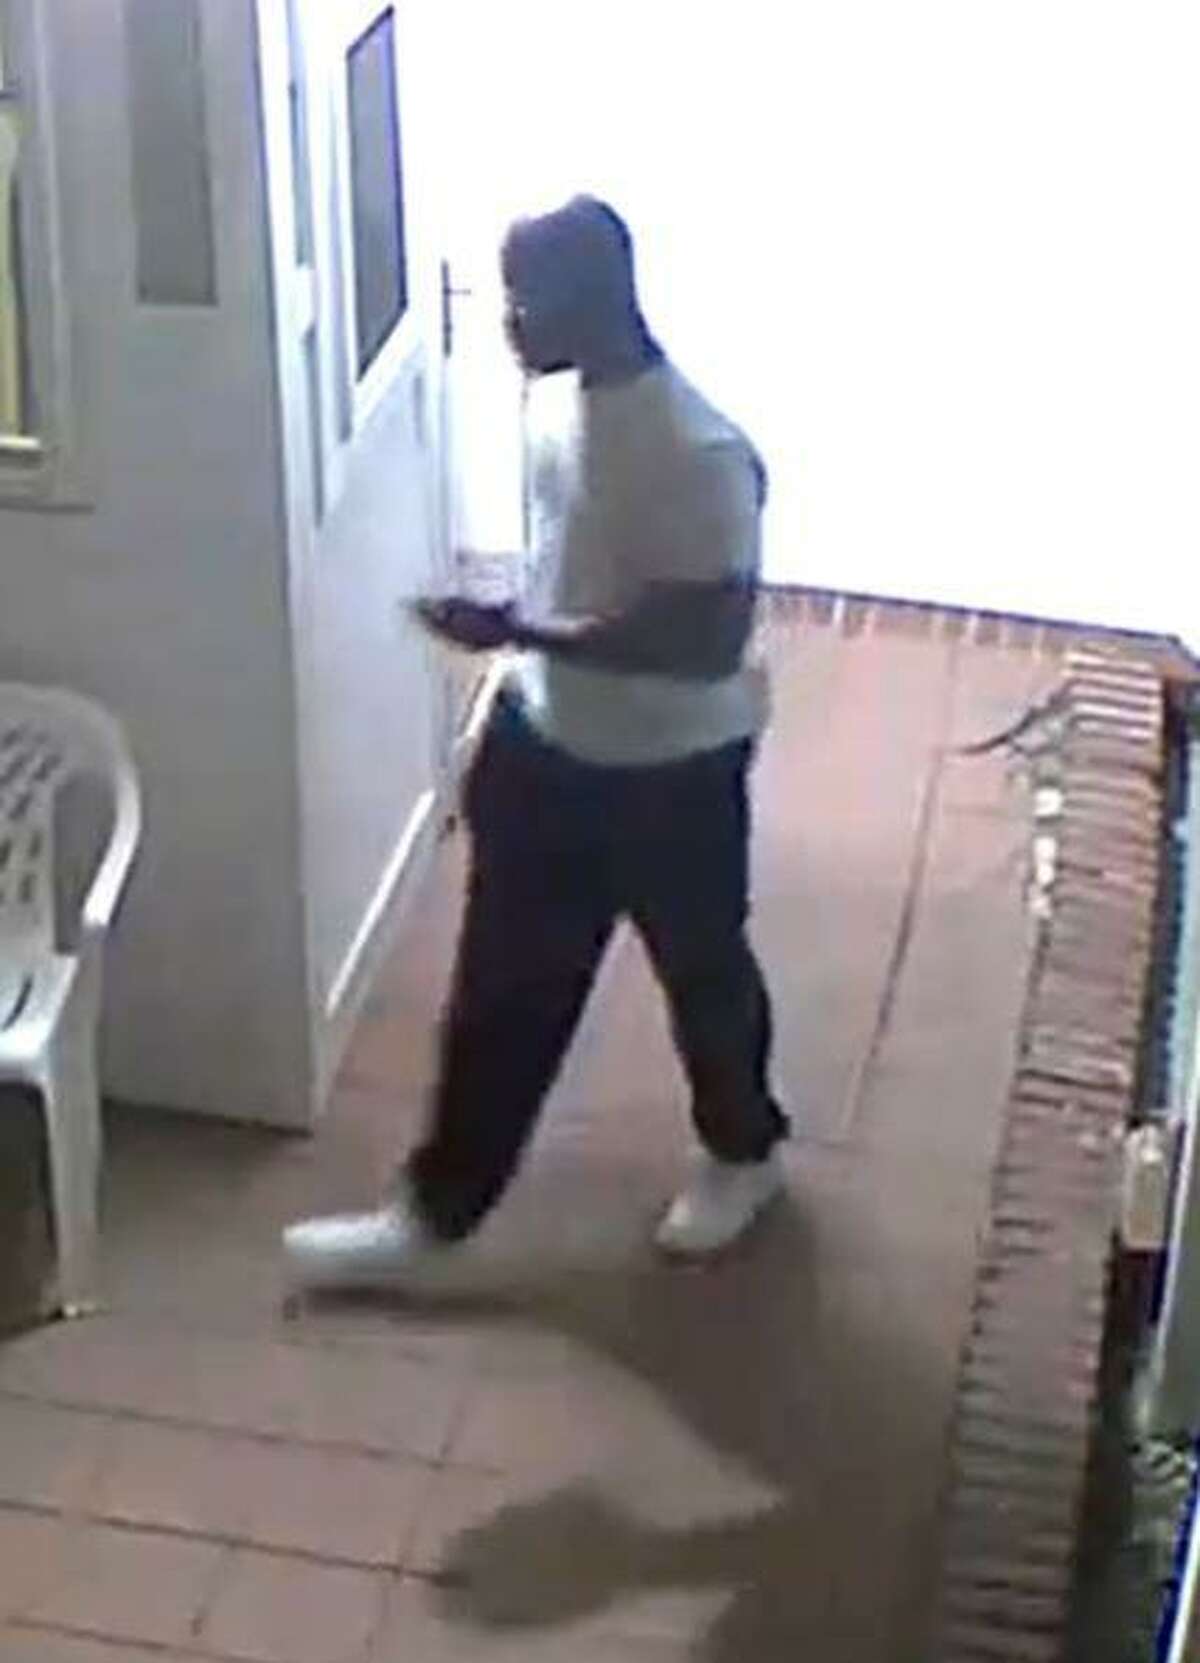 Police released video surveillance stills of this person of interest in the arson case Thursday.